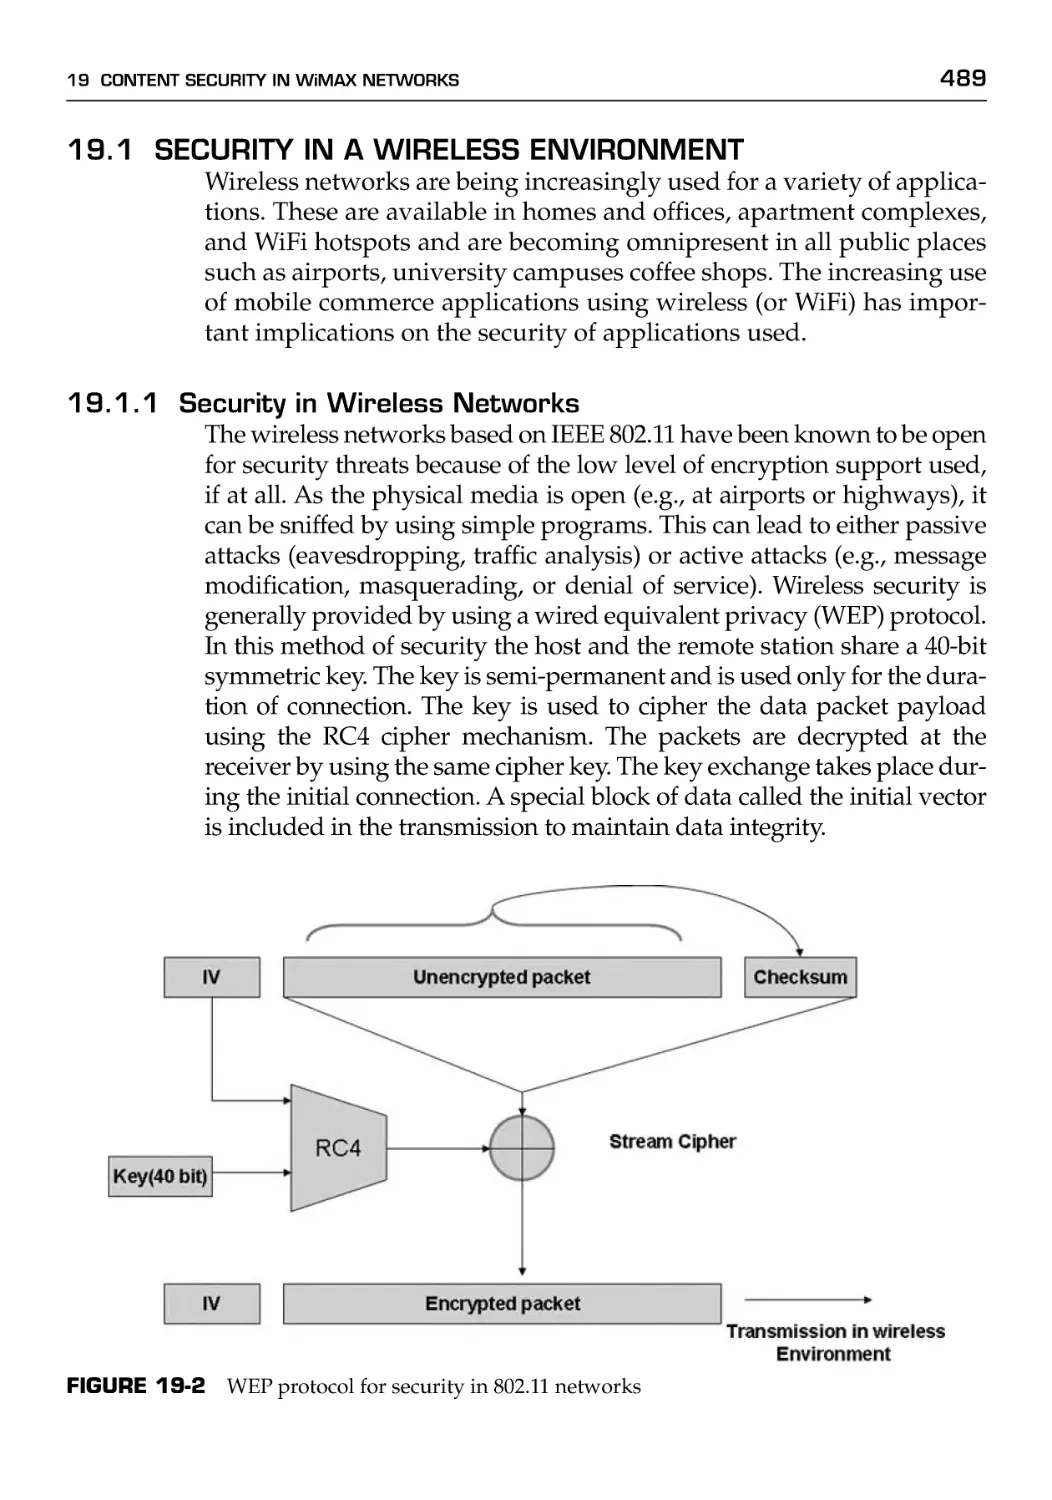 19.1 Security in a Wireless Environment